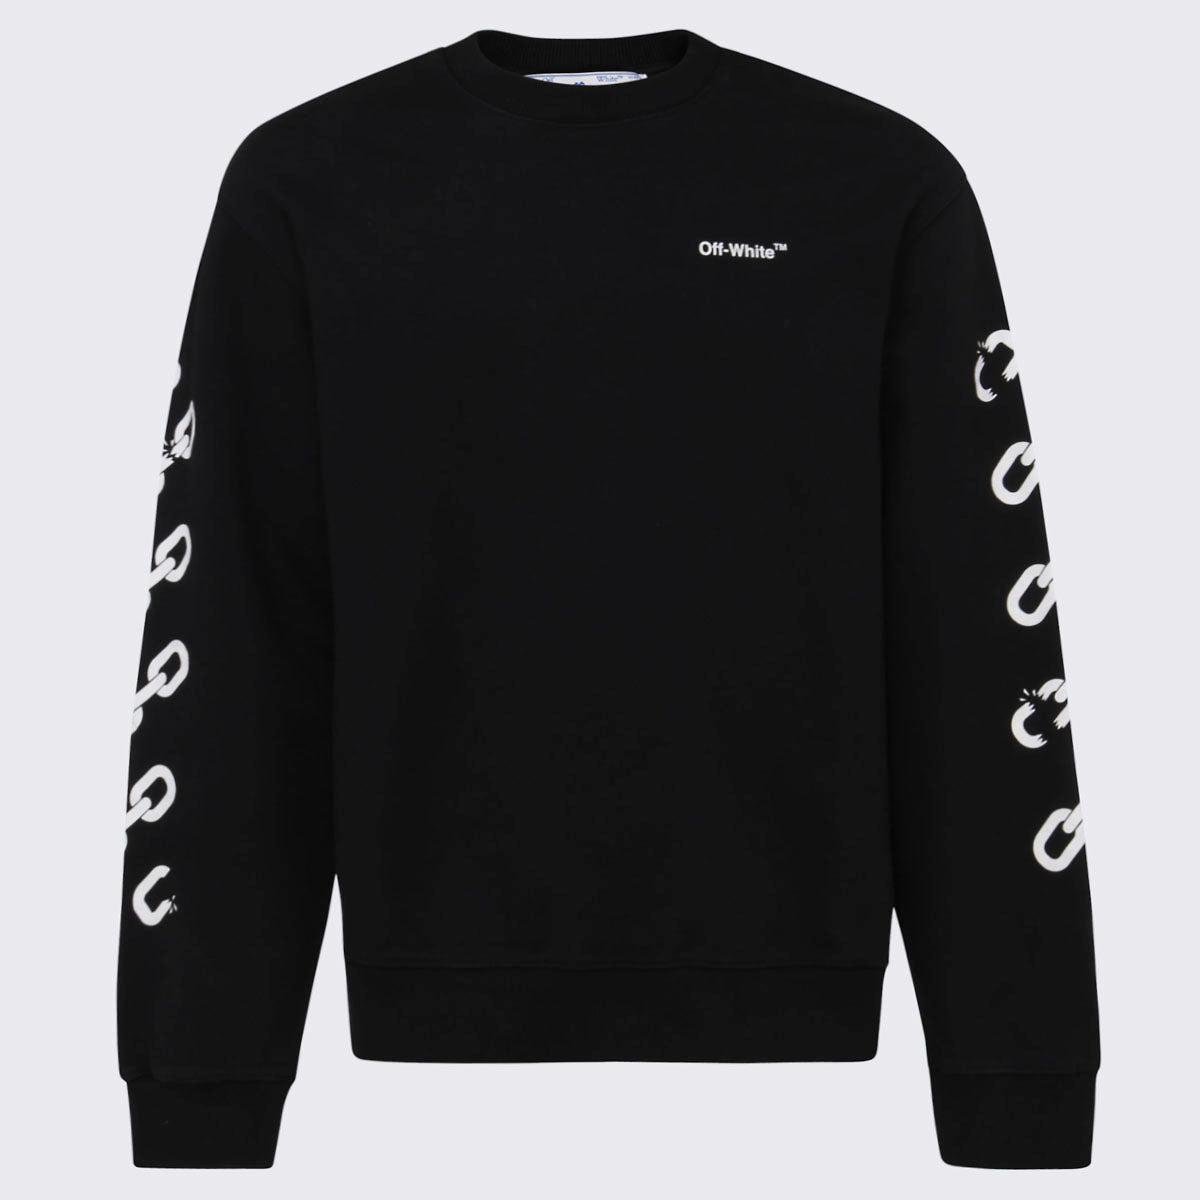 Off-White c/o Virgil Abloh Cotton Off White Shirts Grey in Black for Men Mens Shirts Off-White c/o Virgil Abloh Shirts Save 51% 